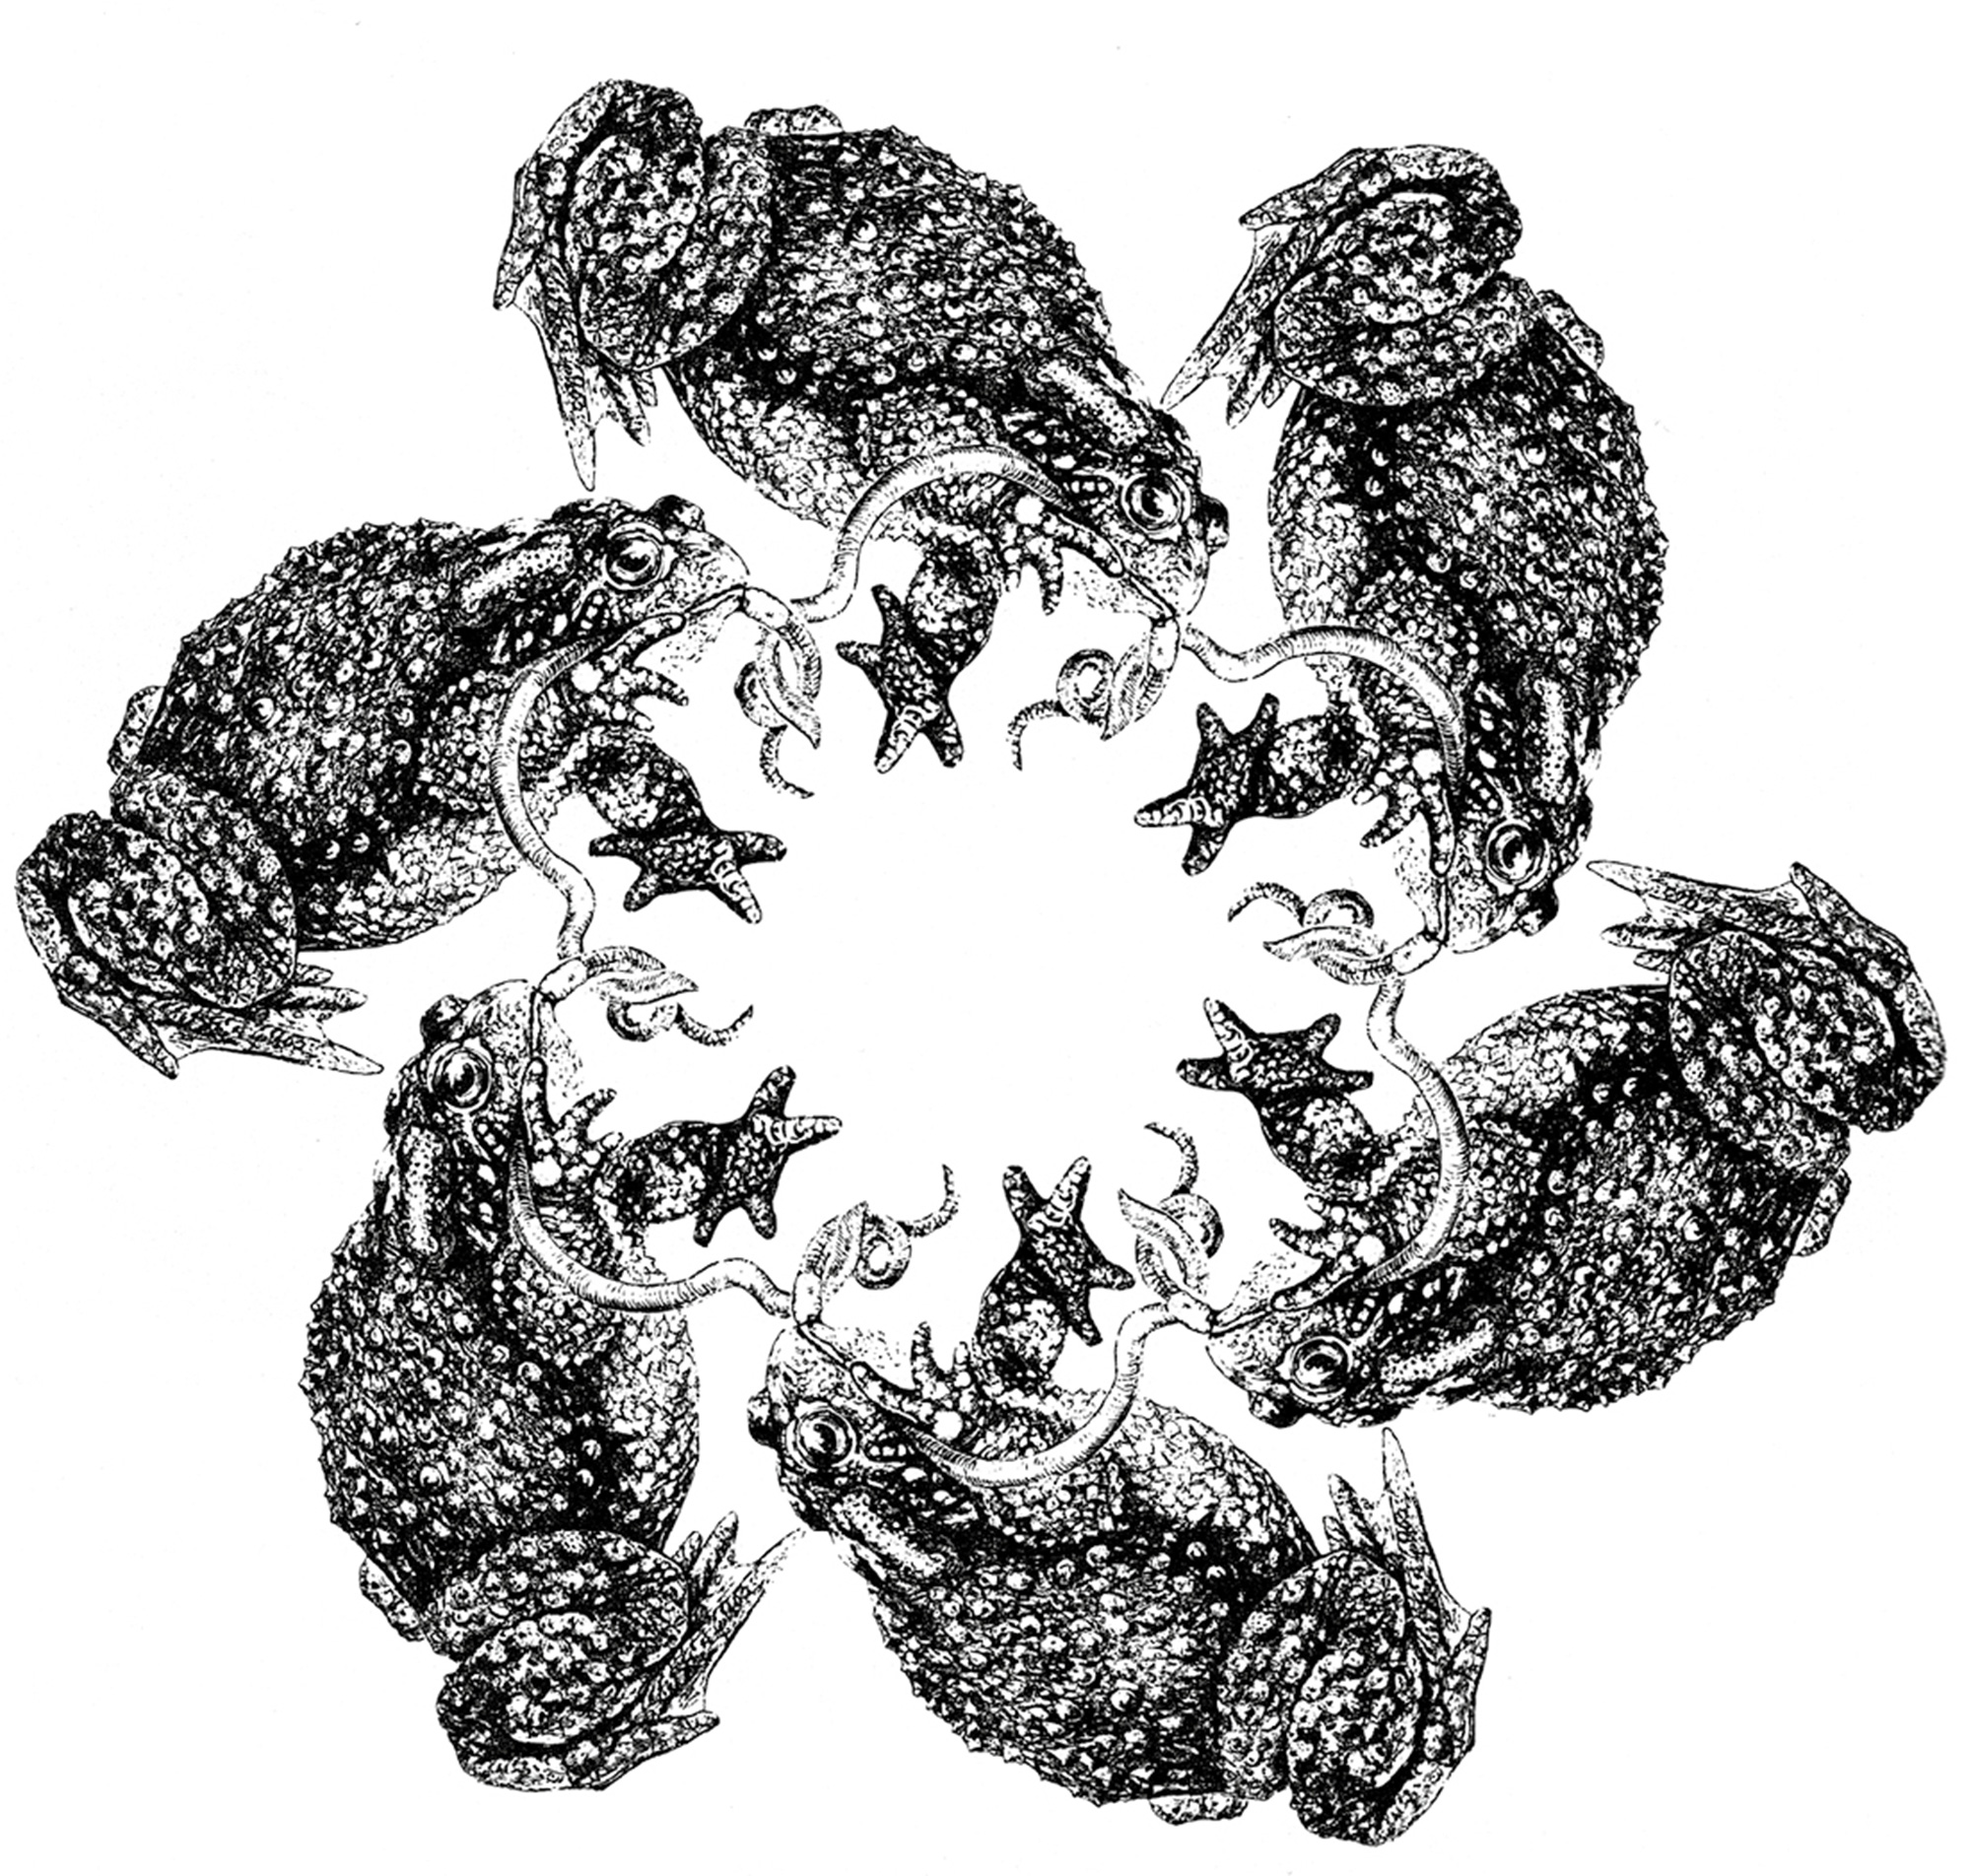 A modified version of a drawing by J. J. Grandville of a “knot” of toads biting a daisy chain of earthworms. 